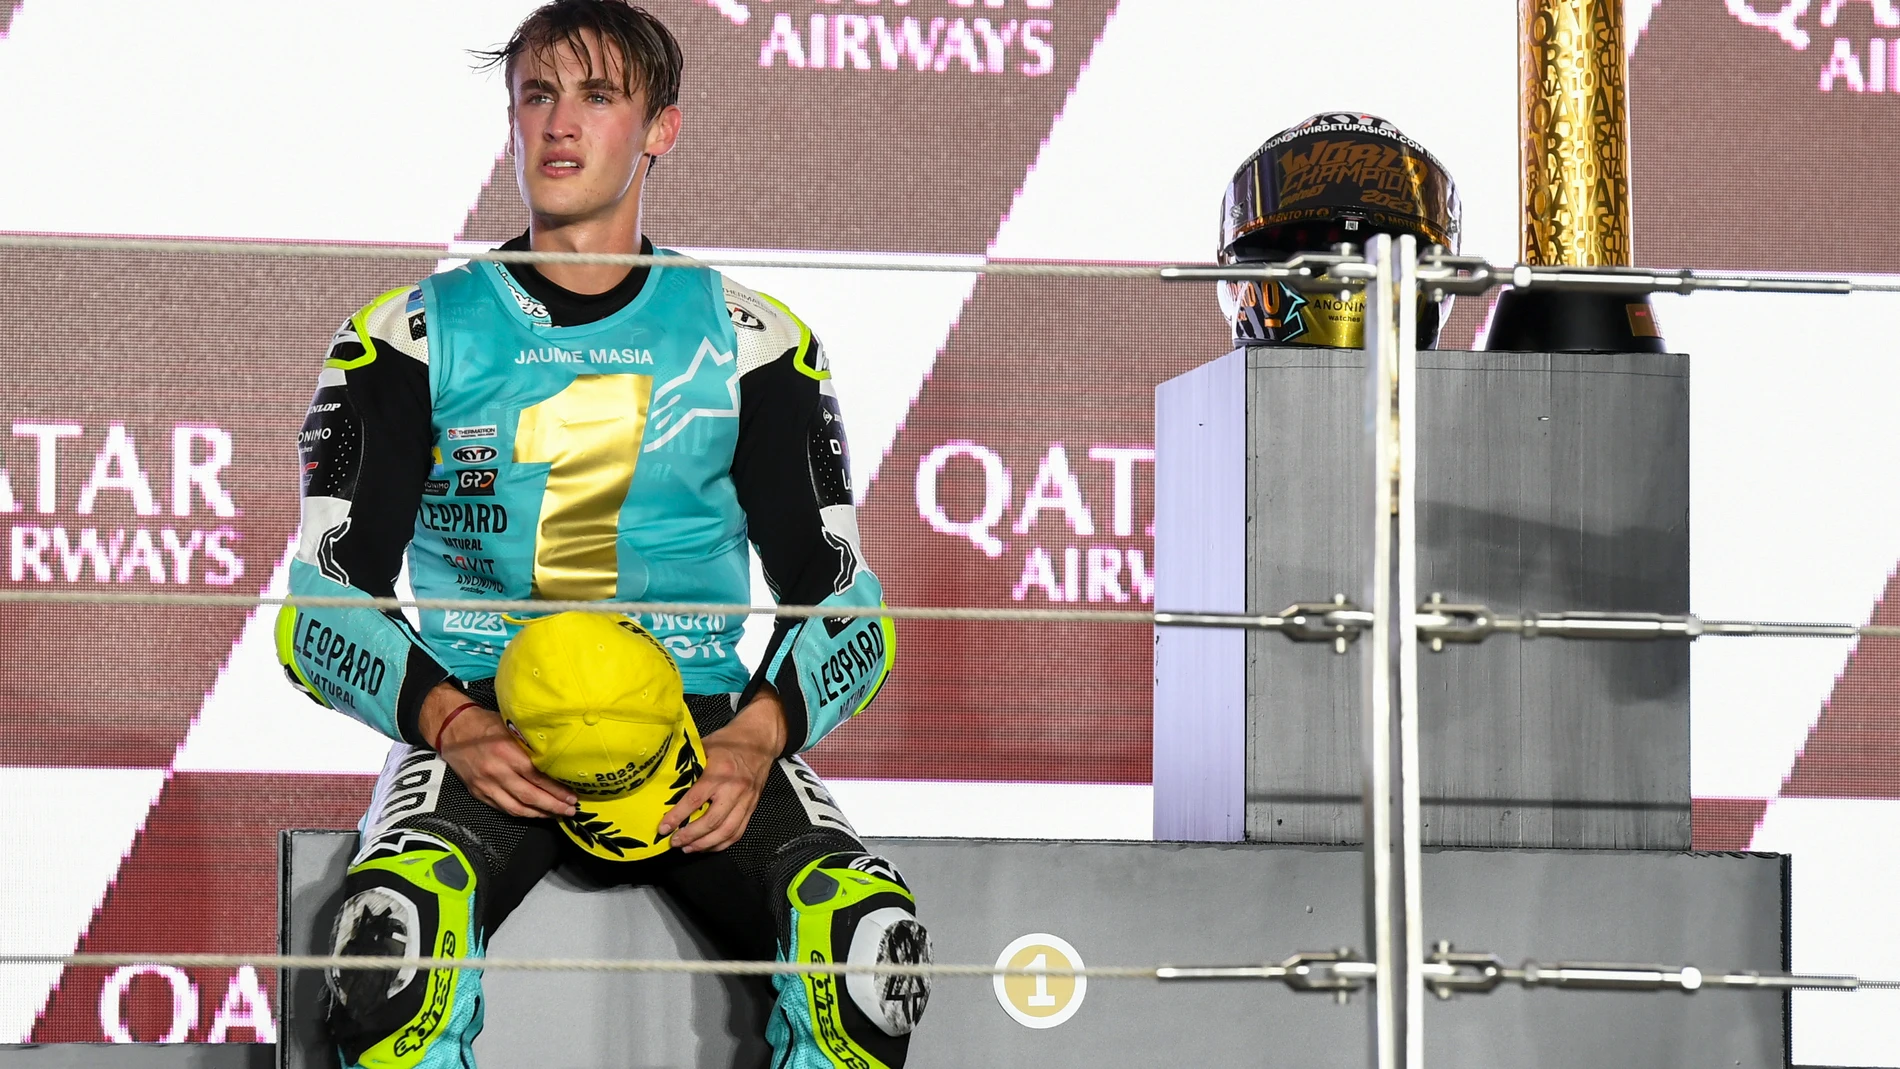 Doha (Qatar), 19/11/2023.- Spanish Moto3 rider Jaume Masia of Leopard Racing celebrates his victory on the podium after the Moto3 race of the Motorcycling Grand Prix of Qatar at the Losail International Circuit in Doha, Qatar, 19 November 2023. (Motociclismo, Ciclismo, Catar) EFE/EPA/NOUSHAD THEKKAYIL